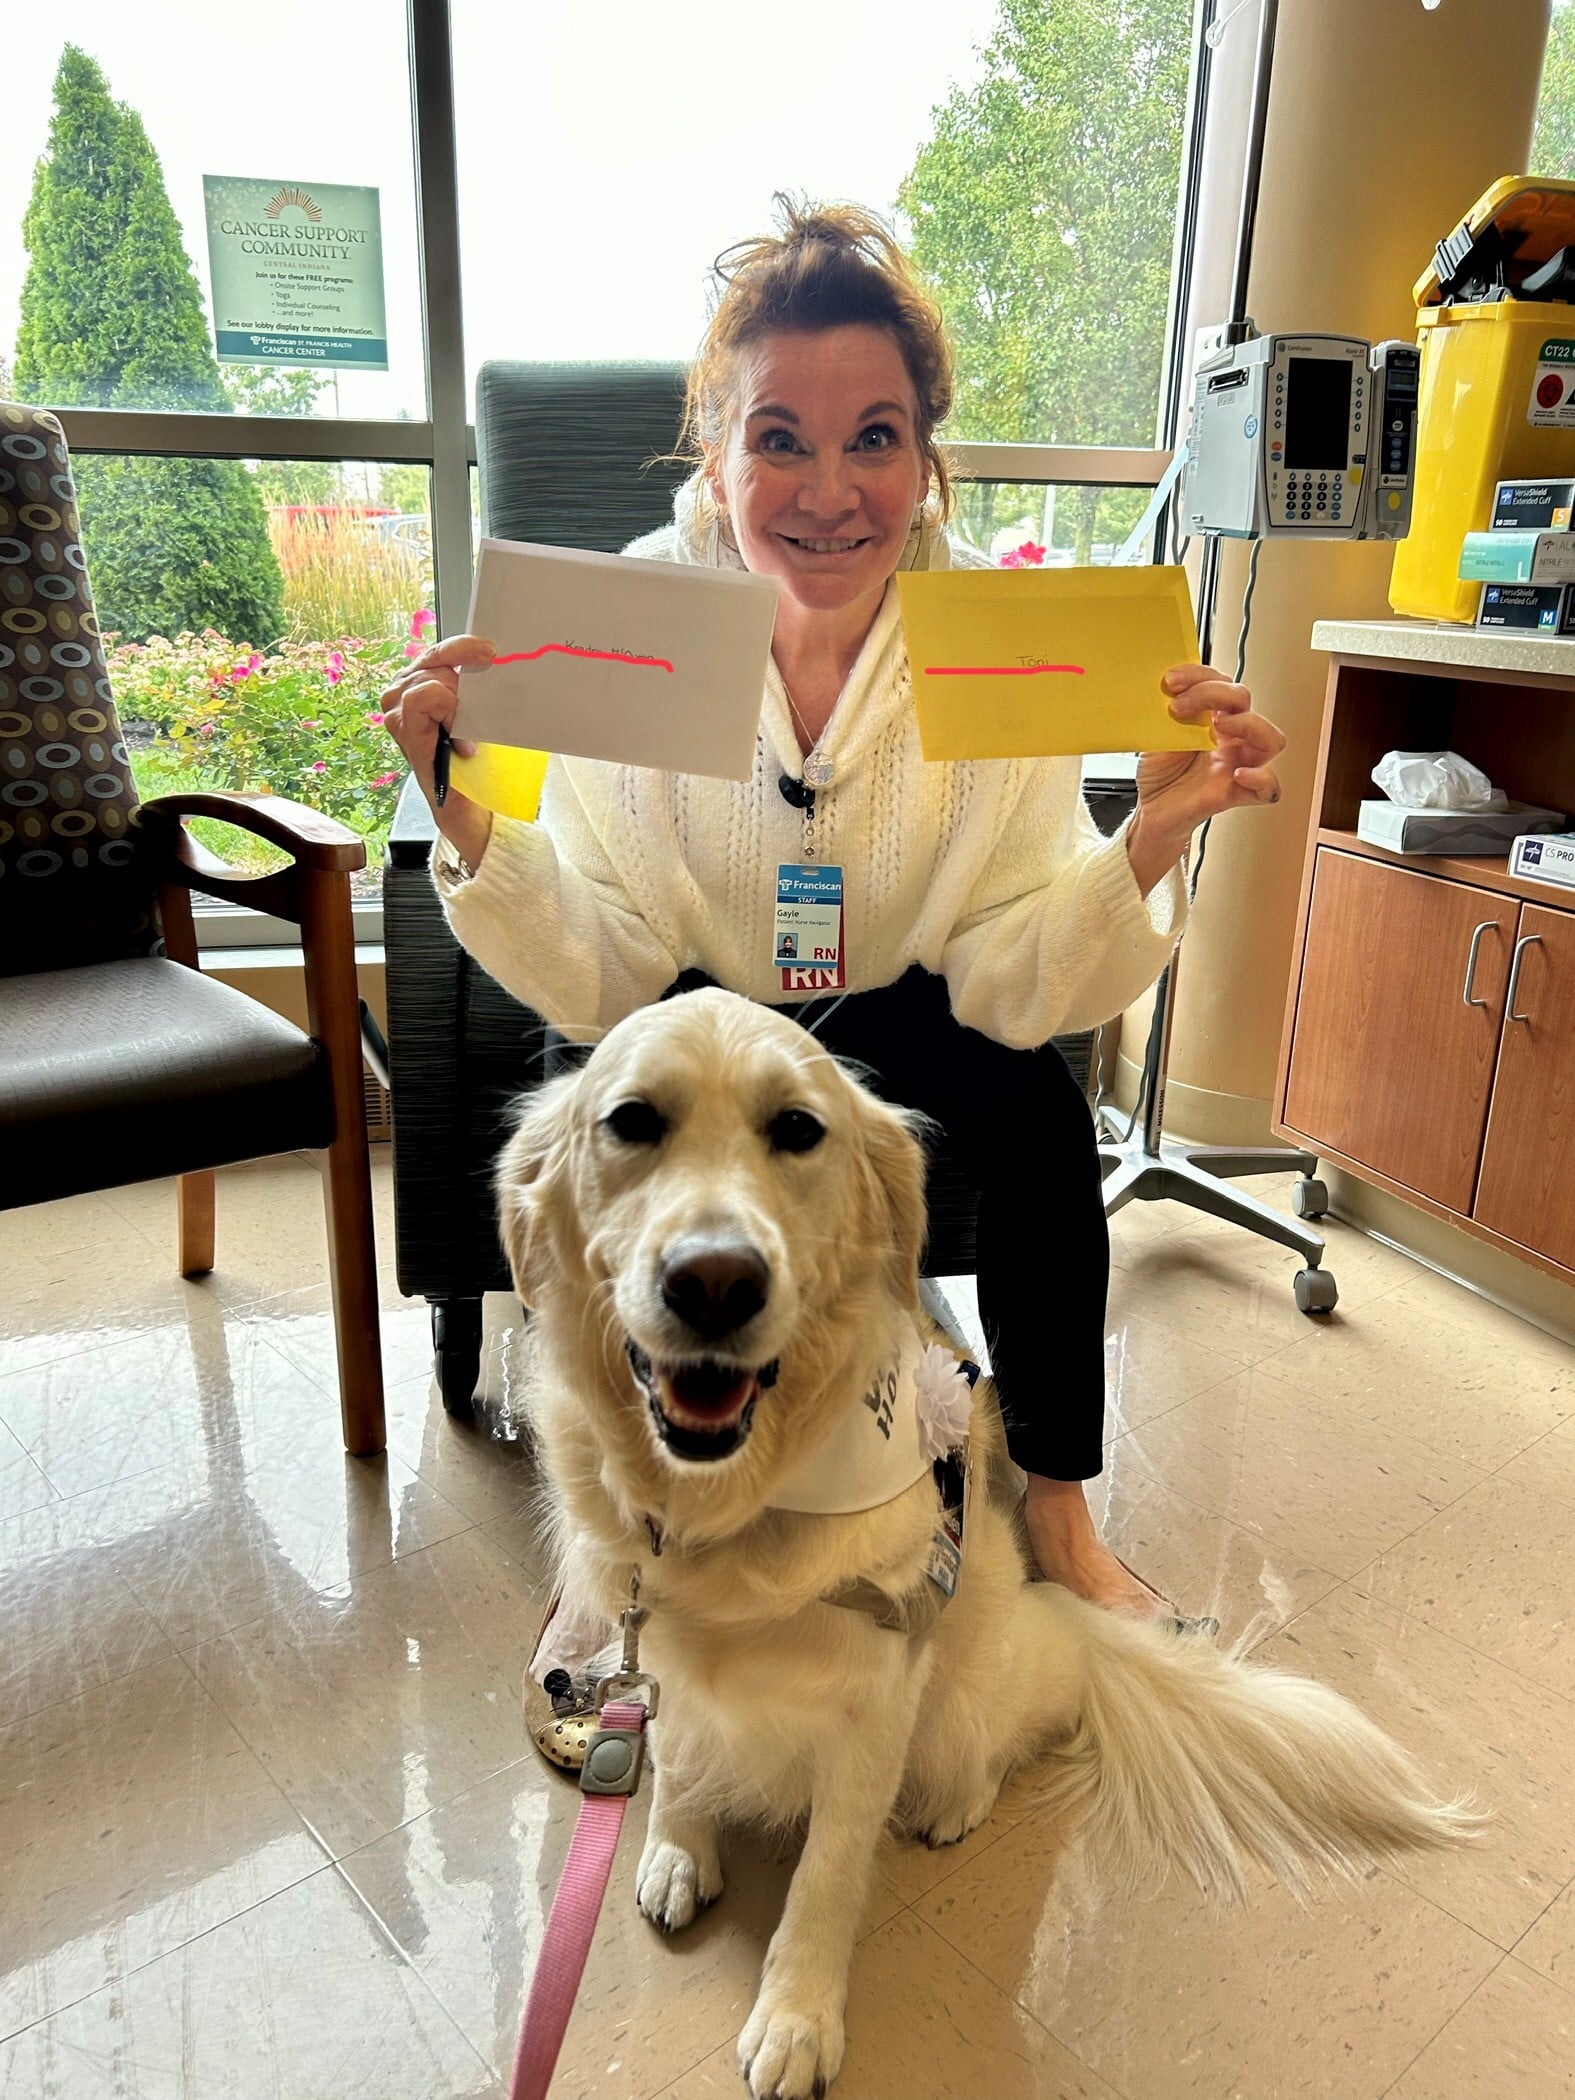 A woman holds up 2 cards, while a therapy dog sits in front of her.